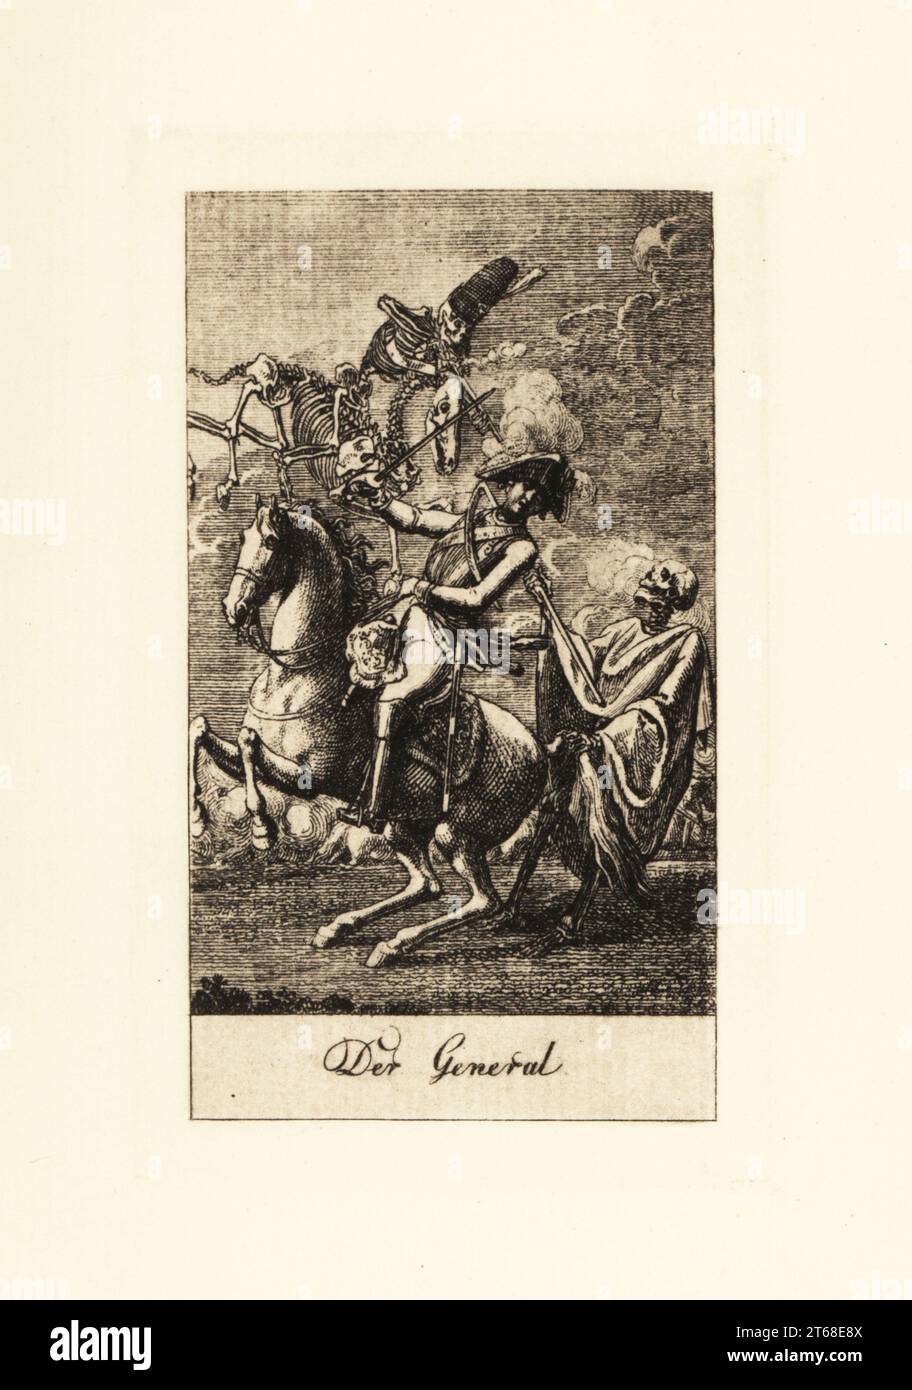 Two skeletons of Death attack a German general on horseback. One skeleton on a spectral horse fires a musket, while another hooks him with a scythe. The General. Der General. Copperplate engraving drawn and etched by Daniel Nikolaus Chodowiecki from a series of Dance of Death, originally published in the Lavenburg Calendar in 1792. Reprinted from the original copperplates in Totentanz by Walther Nithack-Stahn, Eigenbrodler Verlag, Berlin, 1926. Stock Photo